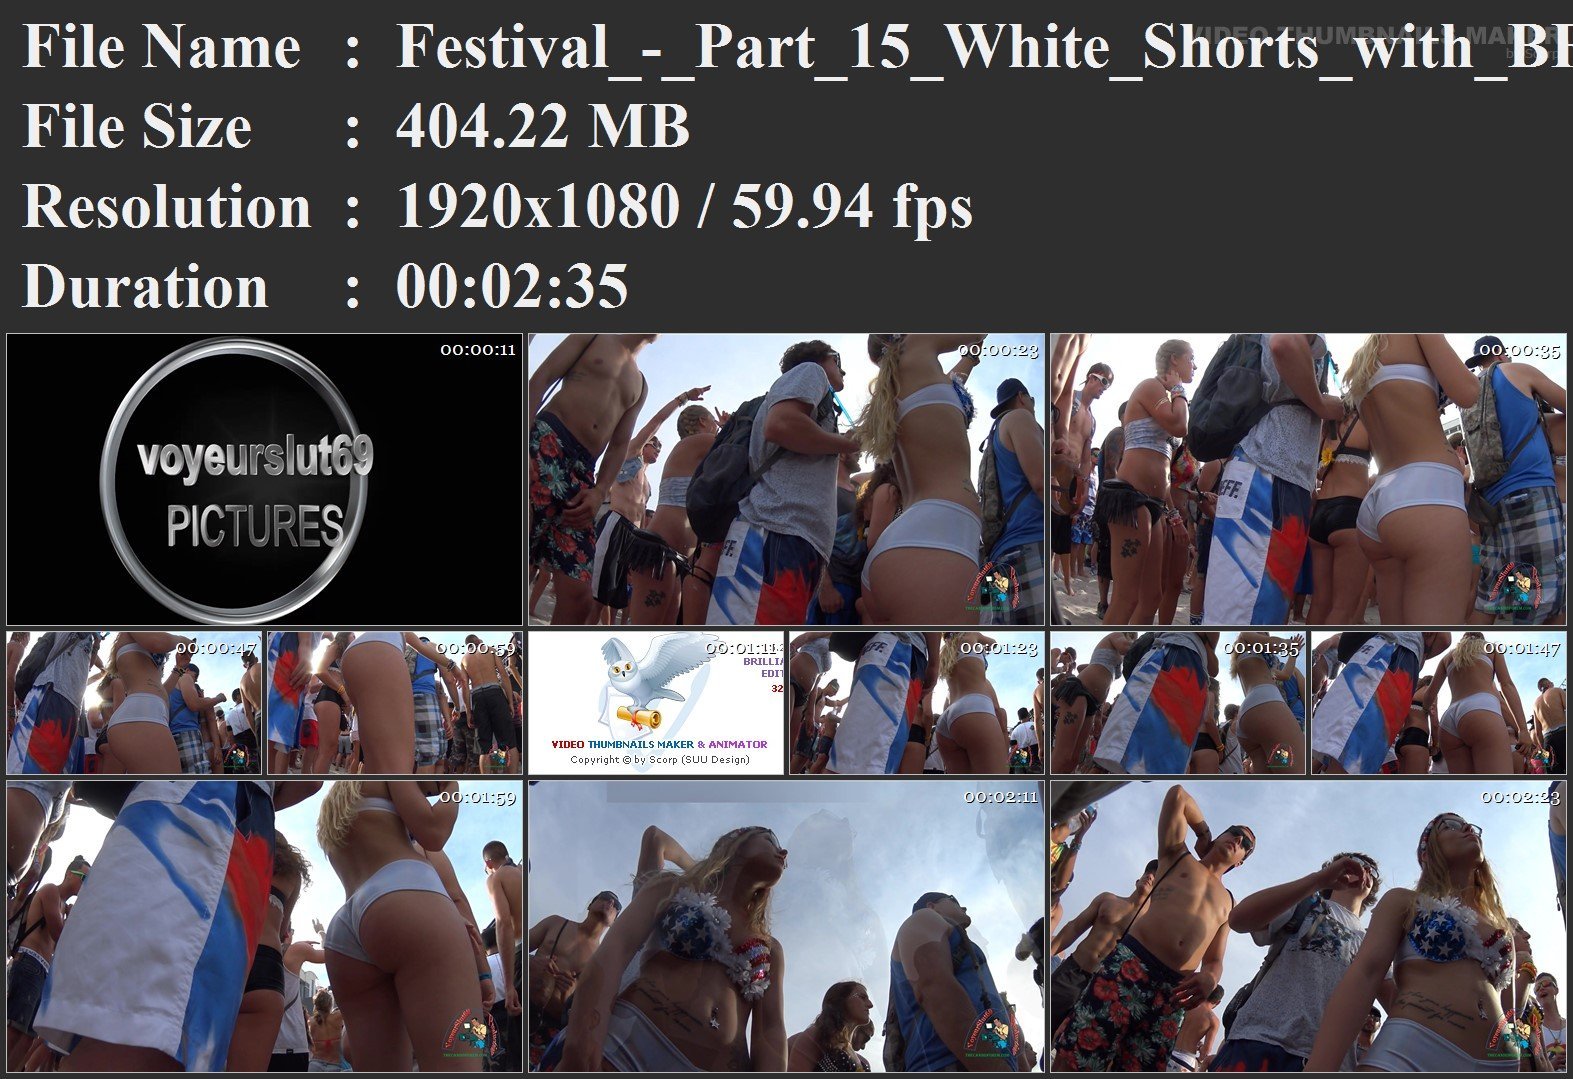 Festival_-_Part_15_White_Shorts_with_BF.mp4.jpg